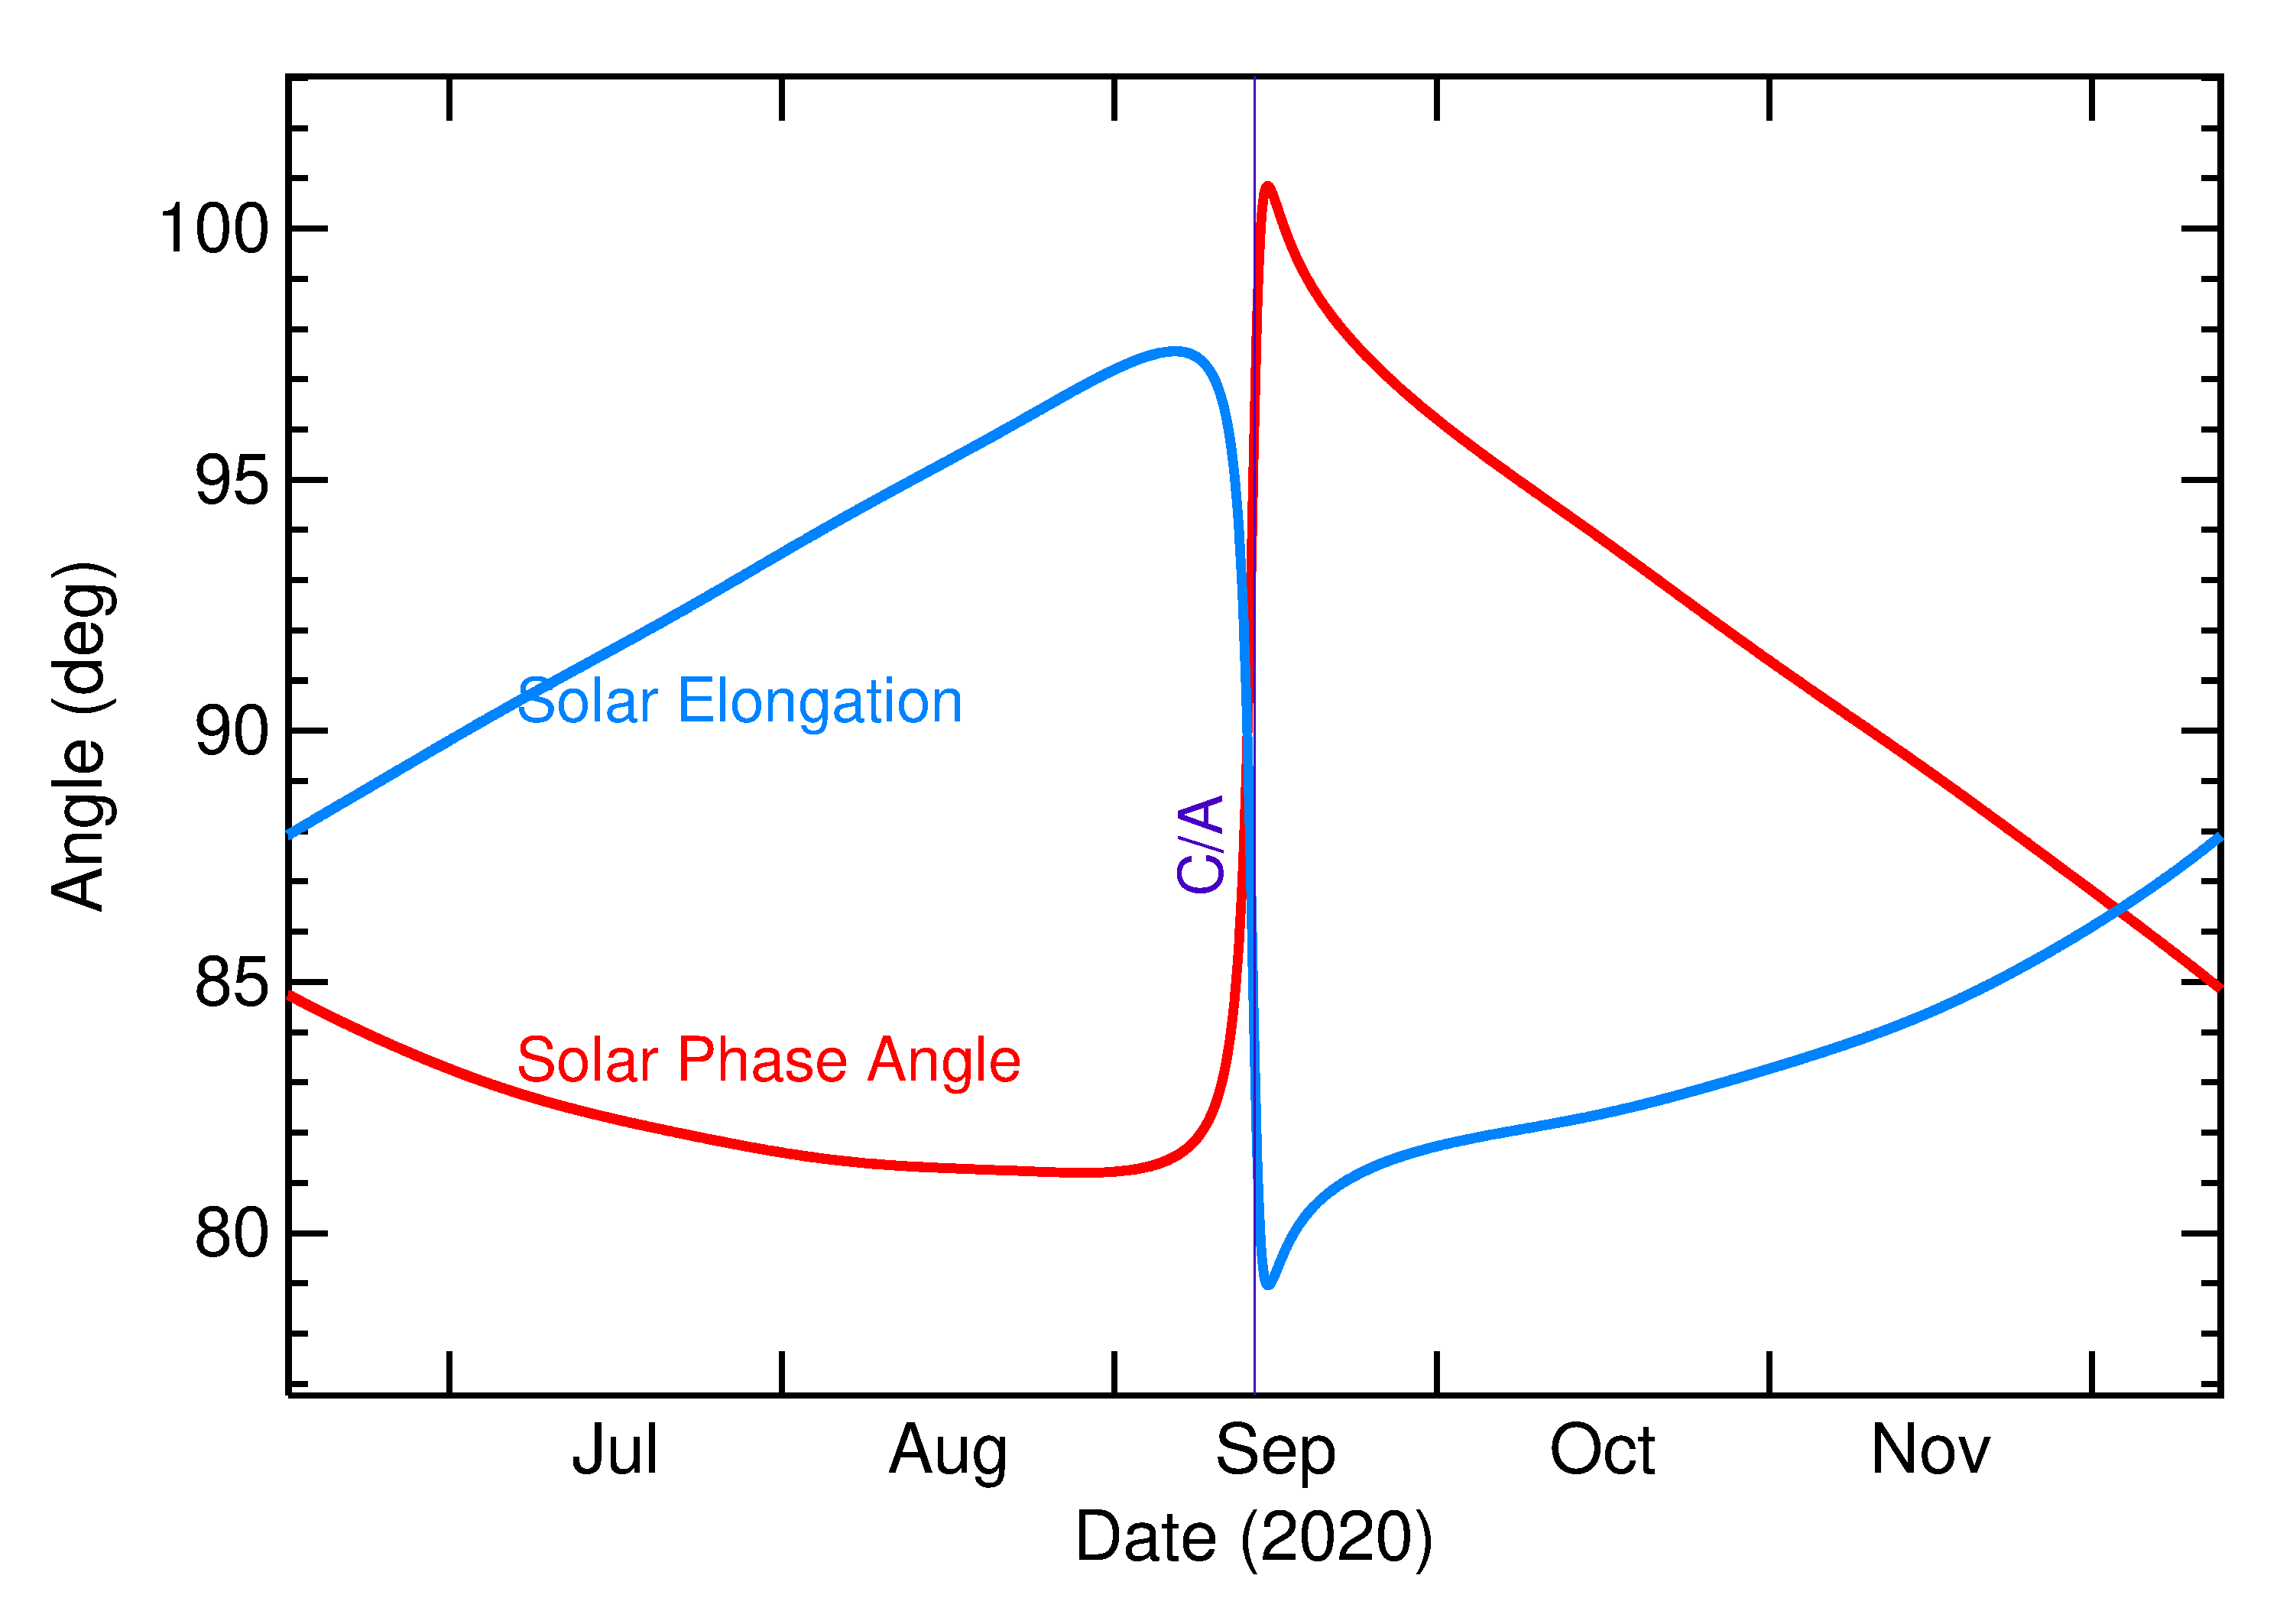 Solar Elongation and Solar Phase Angle of 2020 SP in the months around closest approach